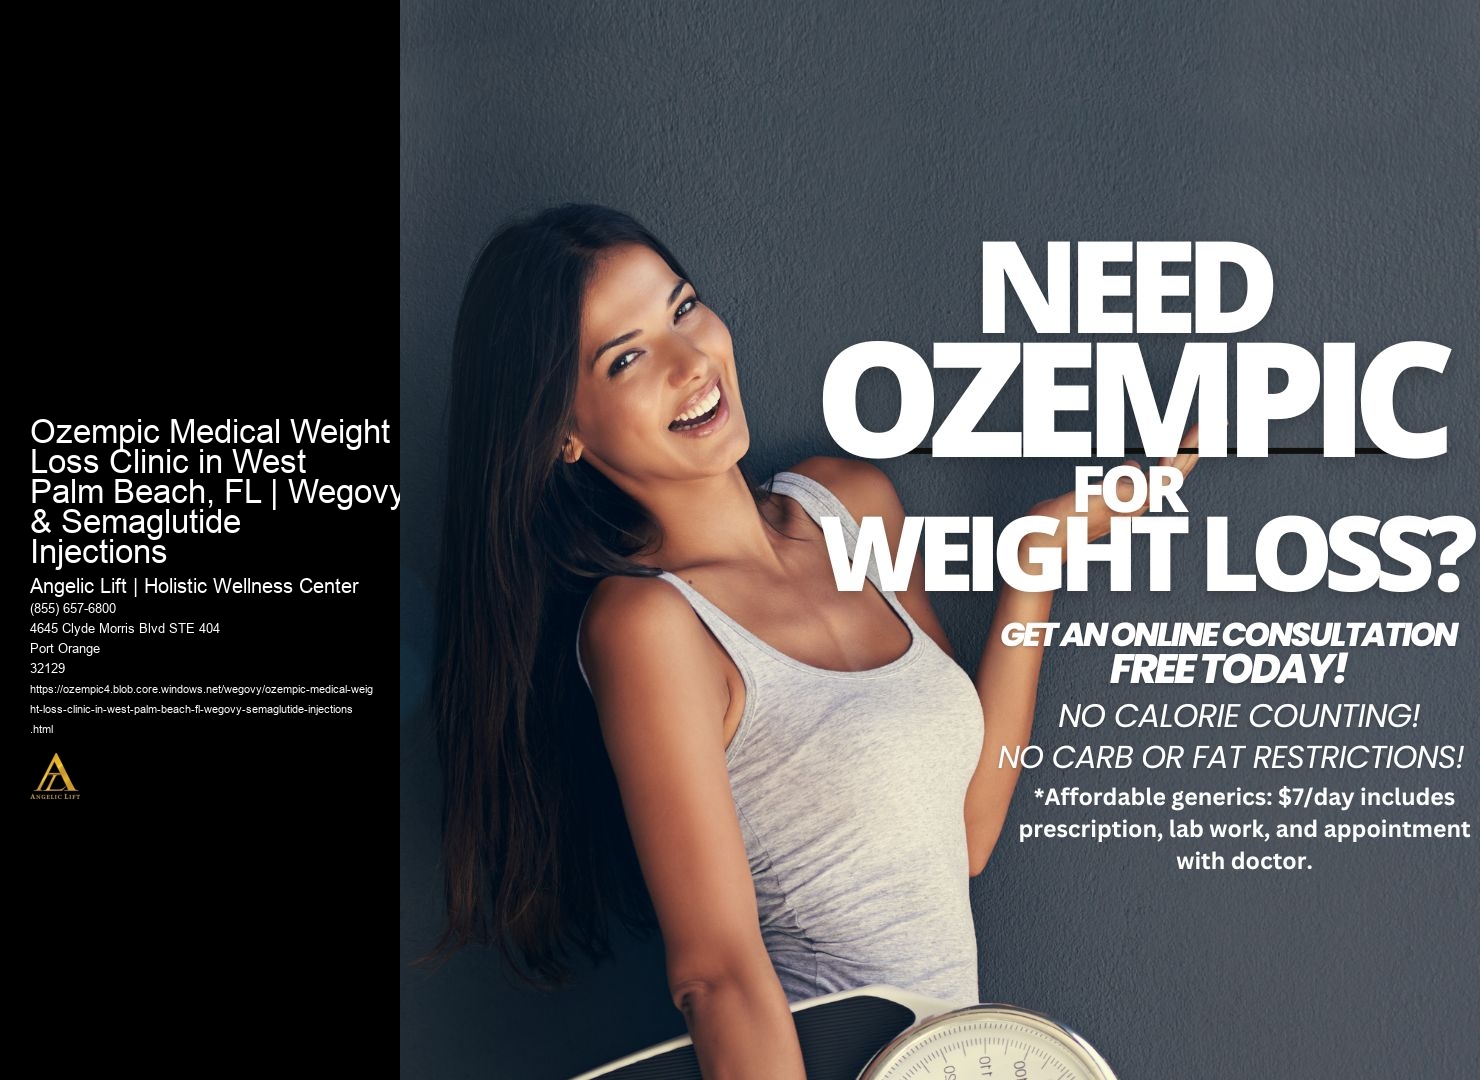 Ozempic Medical Weight Loss Clinic in West Palm Beach, FL | Wegovy & Semaglutide Injections